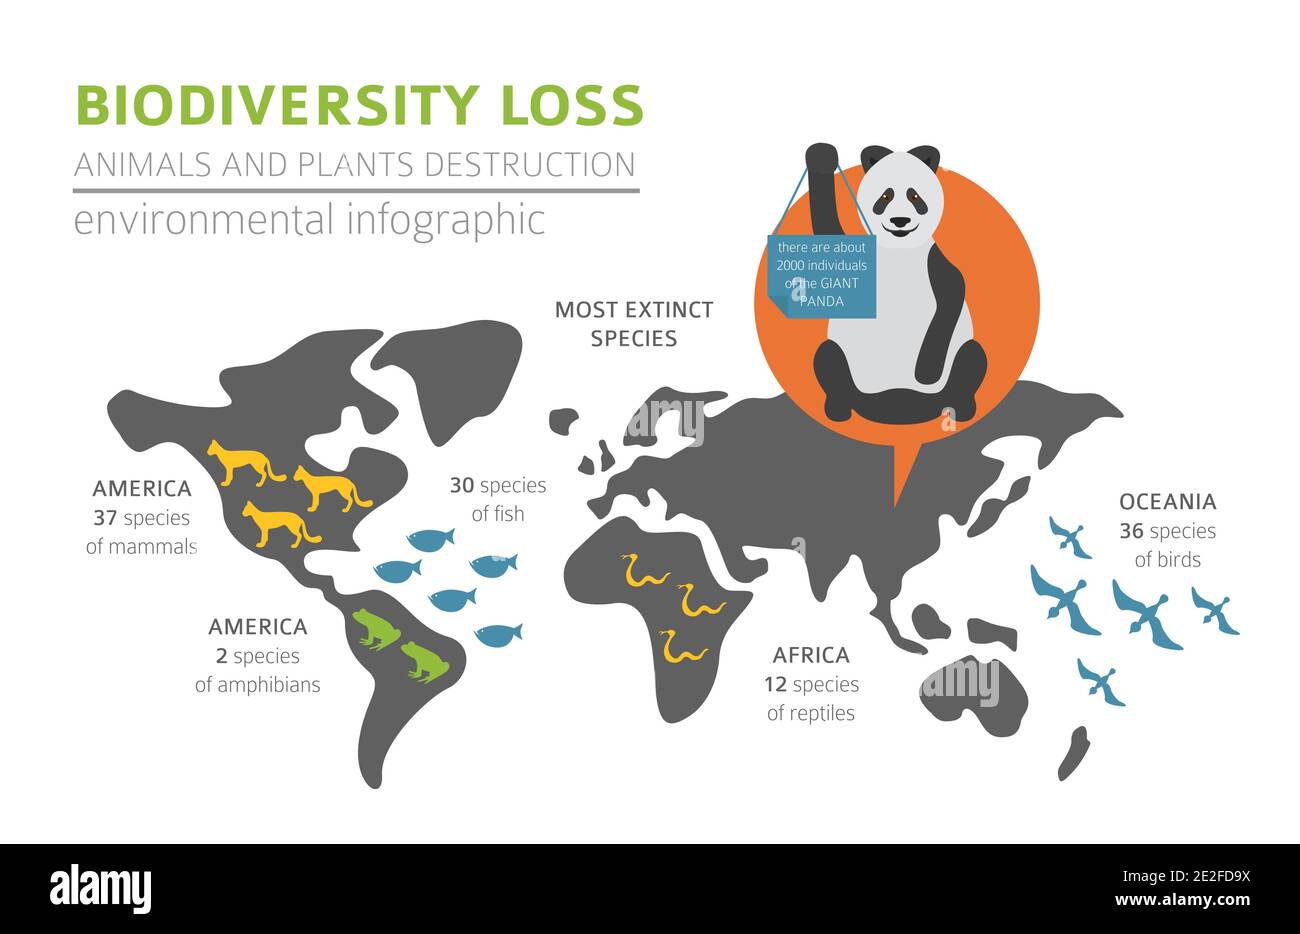 Global environmental problems. Biodiversiry loss infographic. Plants and animals destruction. Vector illustration Stock Vector